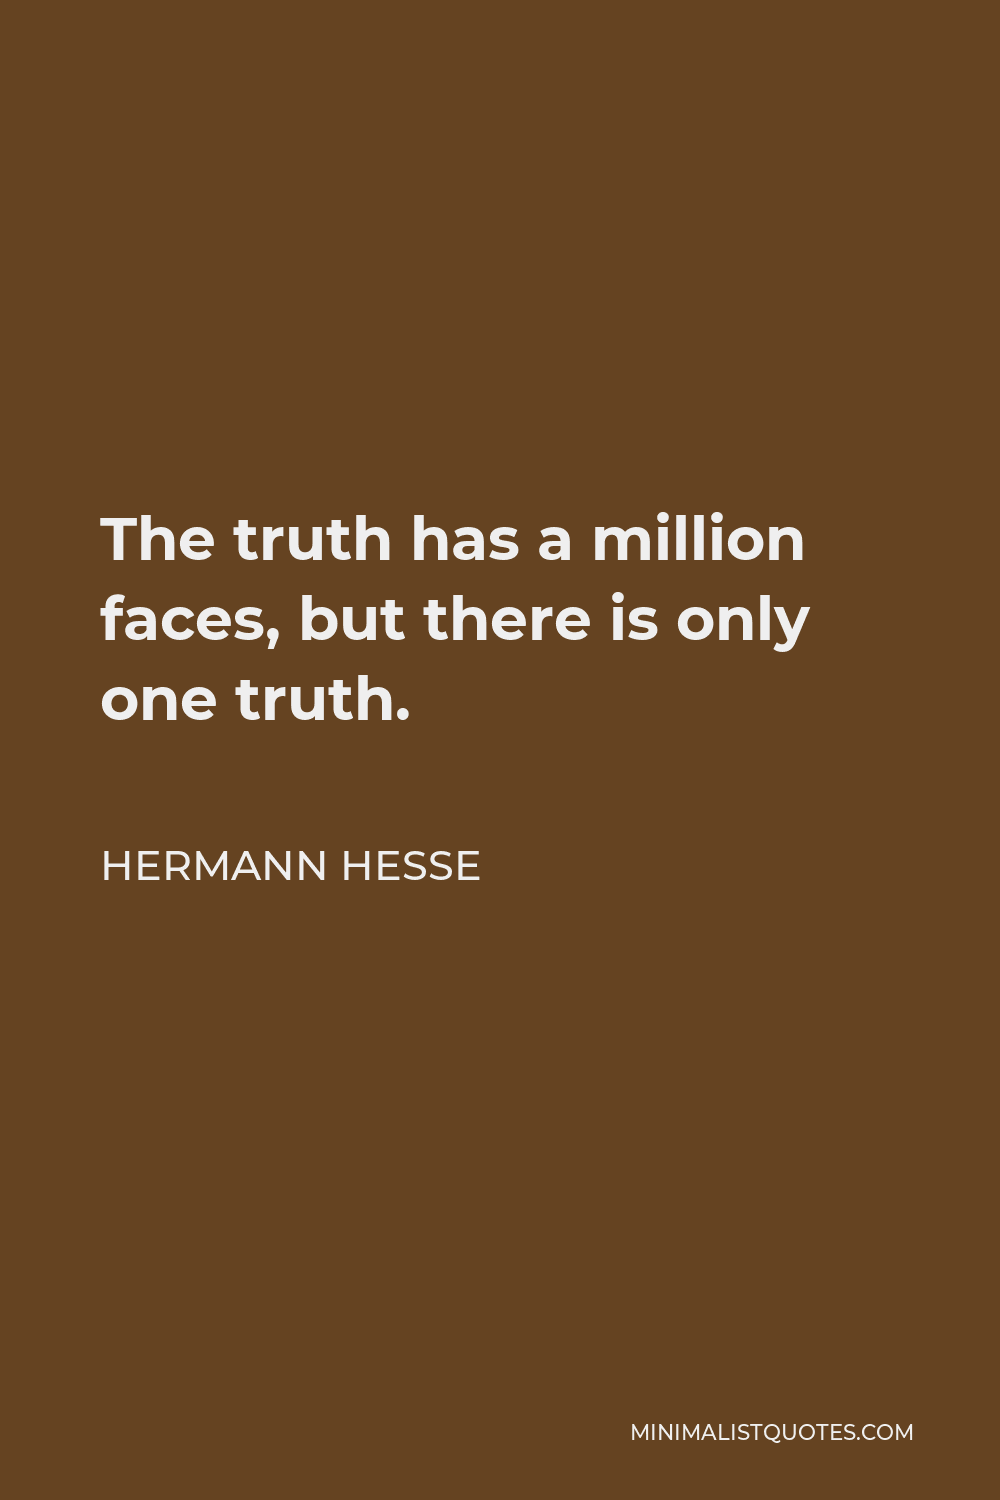 Hermann Hesse Quote - The truth has a million faces, but there is only one truth.